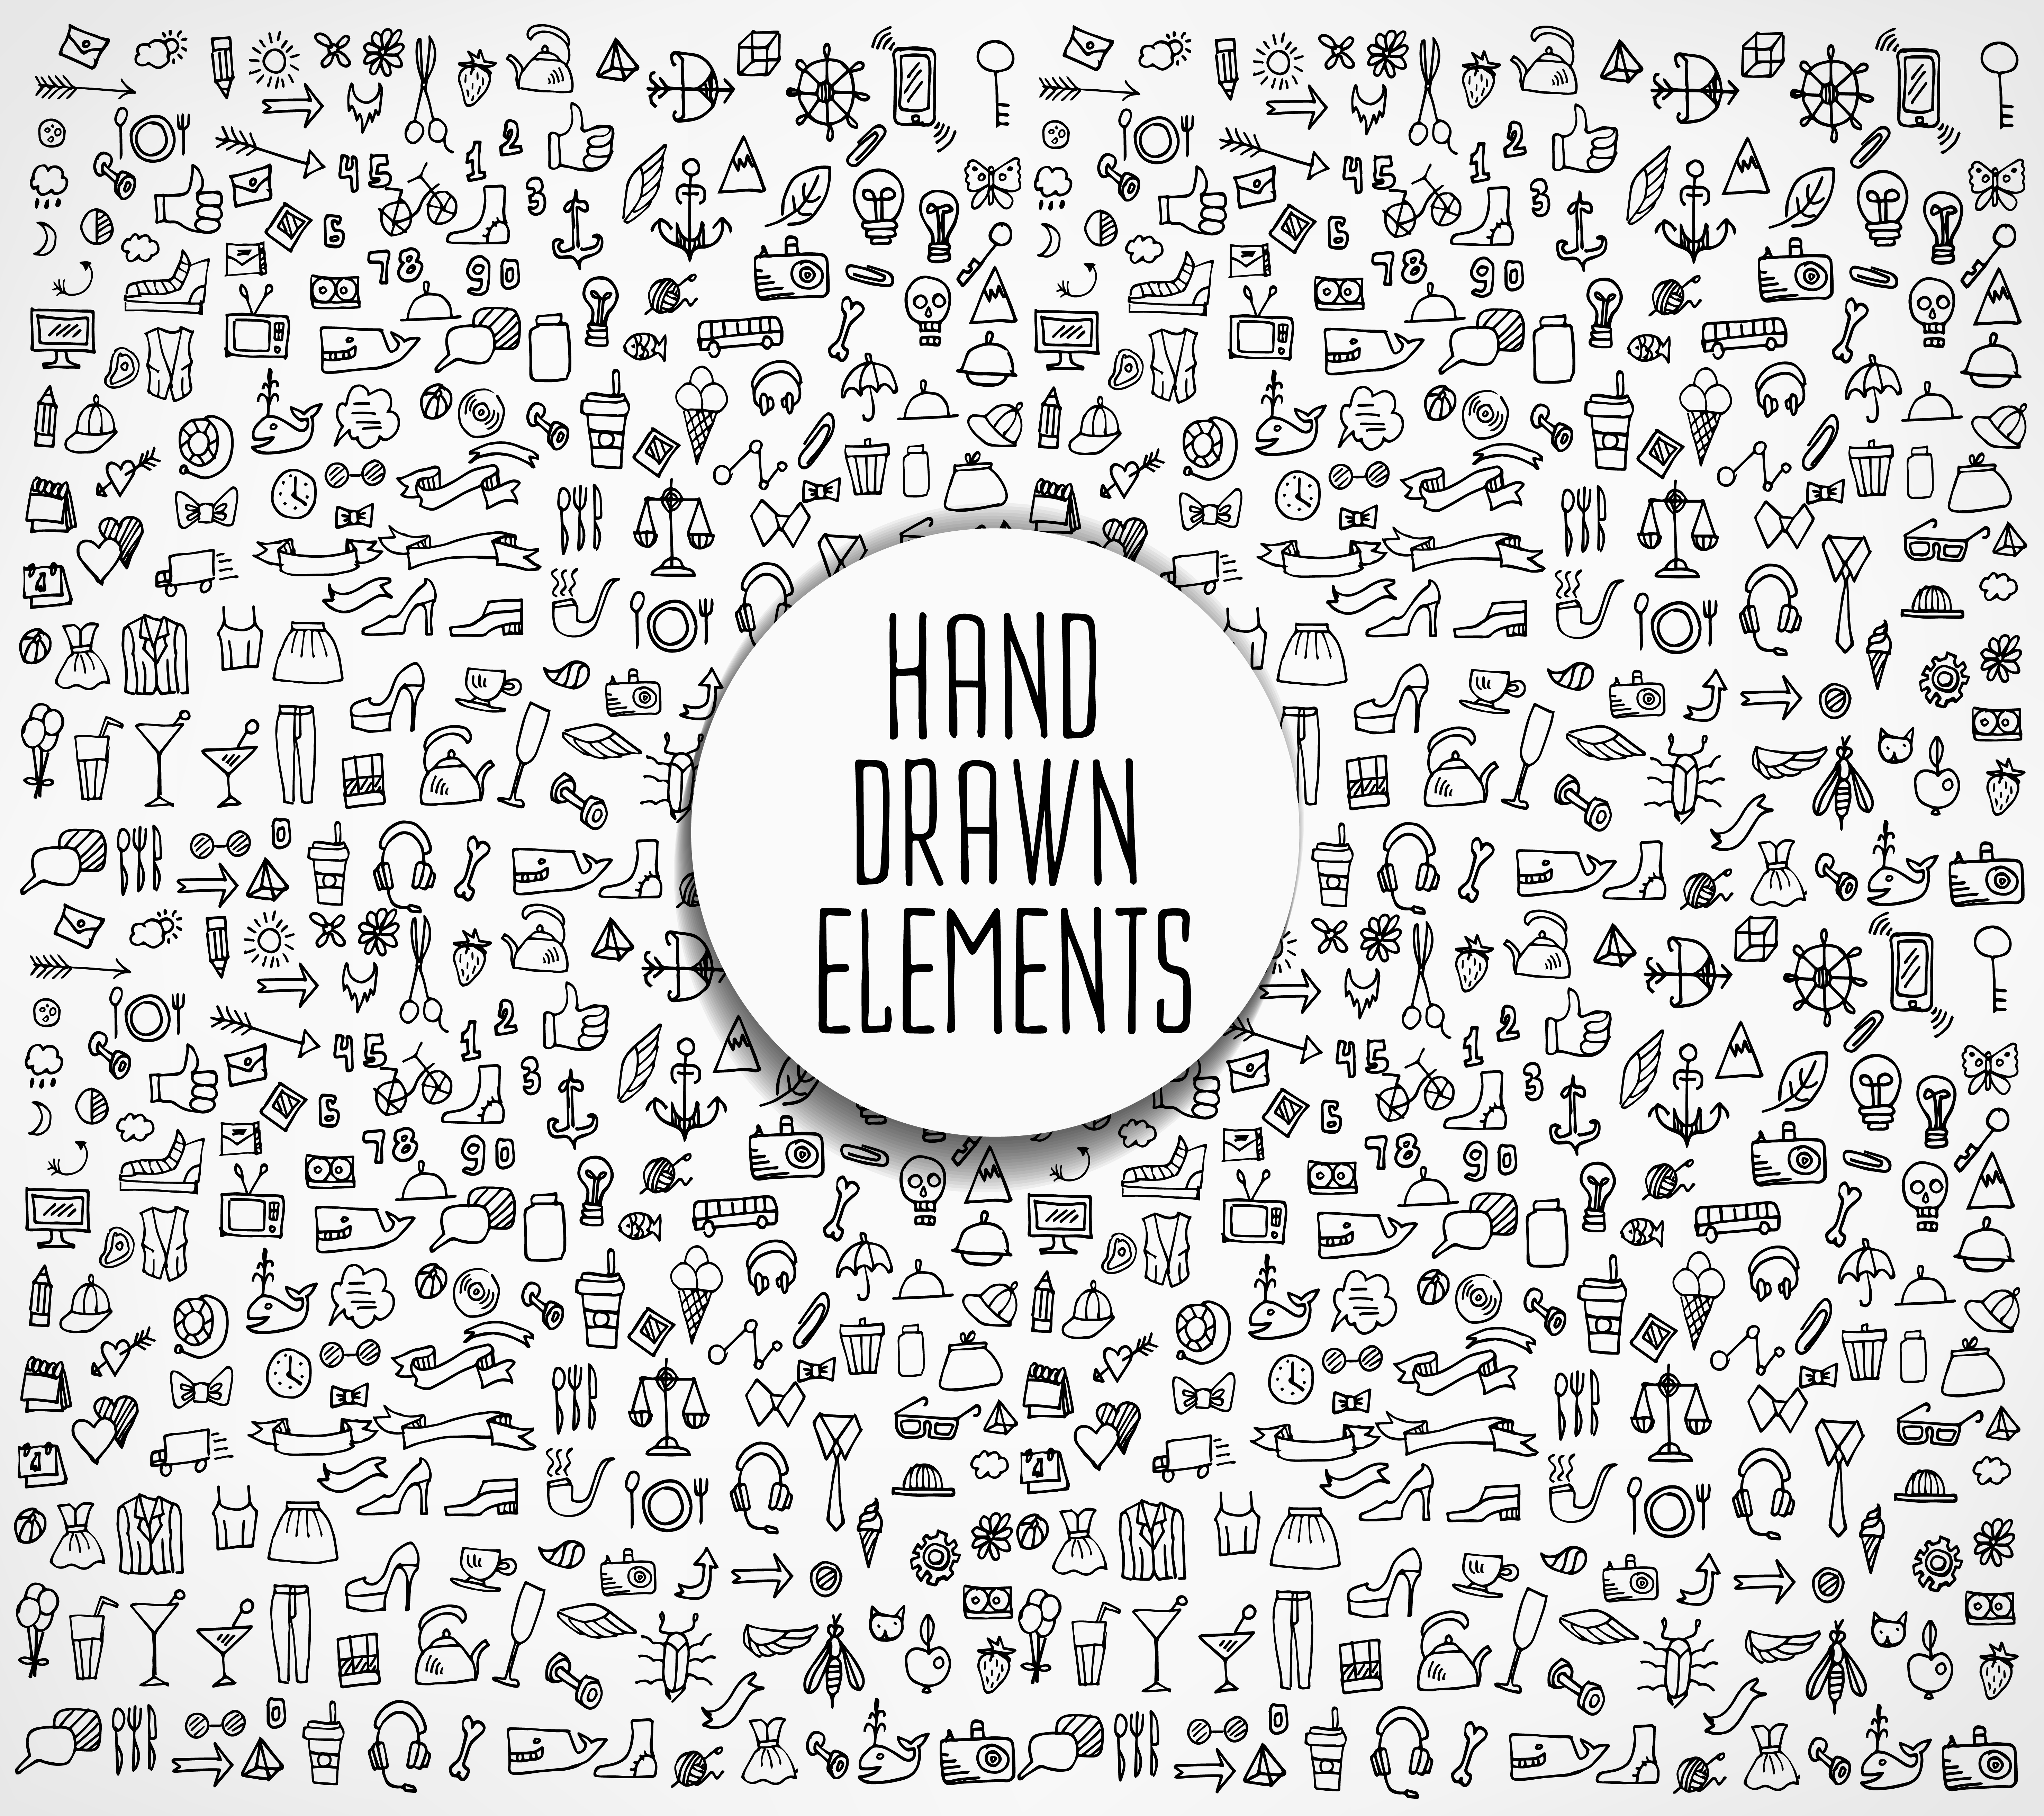 Hand drawn icons and elements pattern. Digital illustration